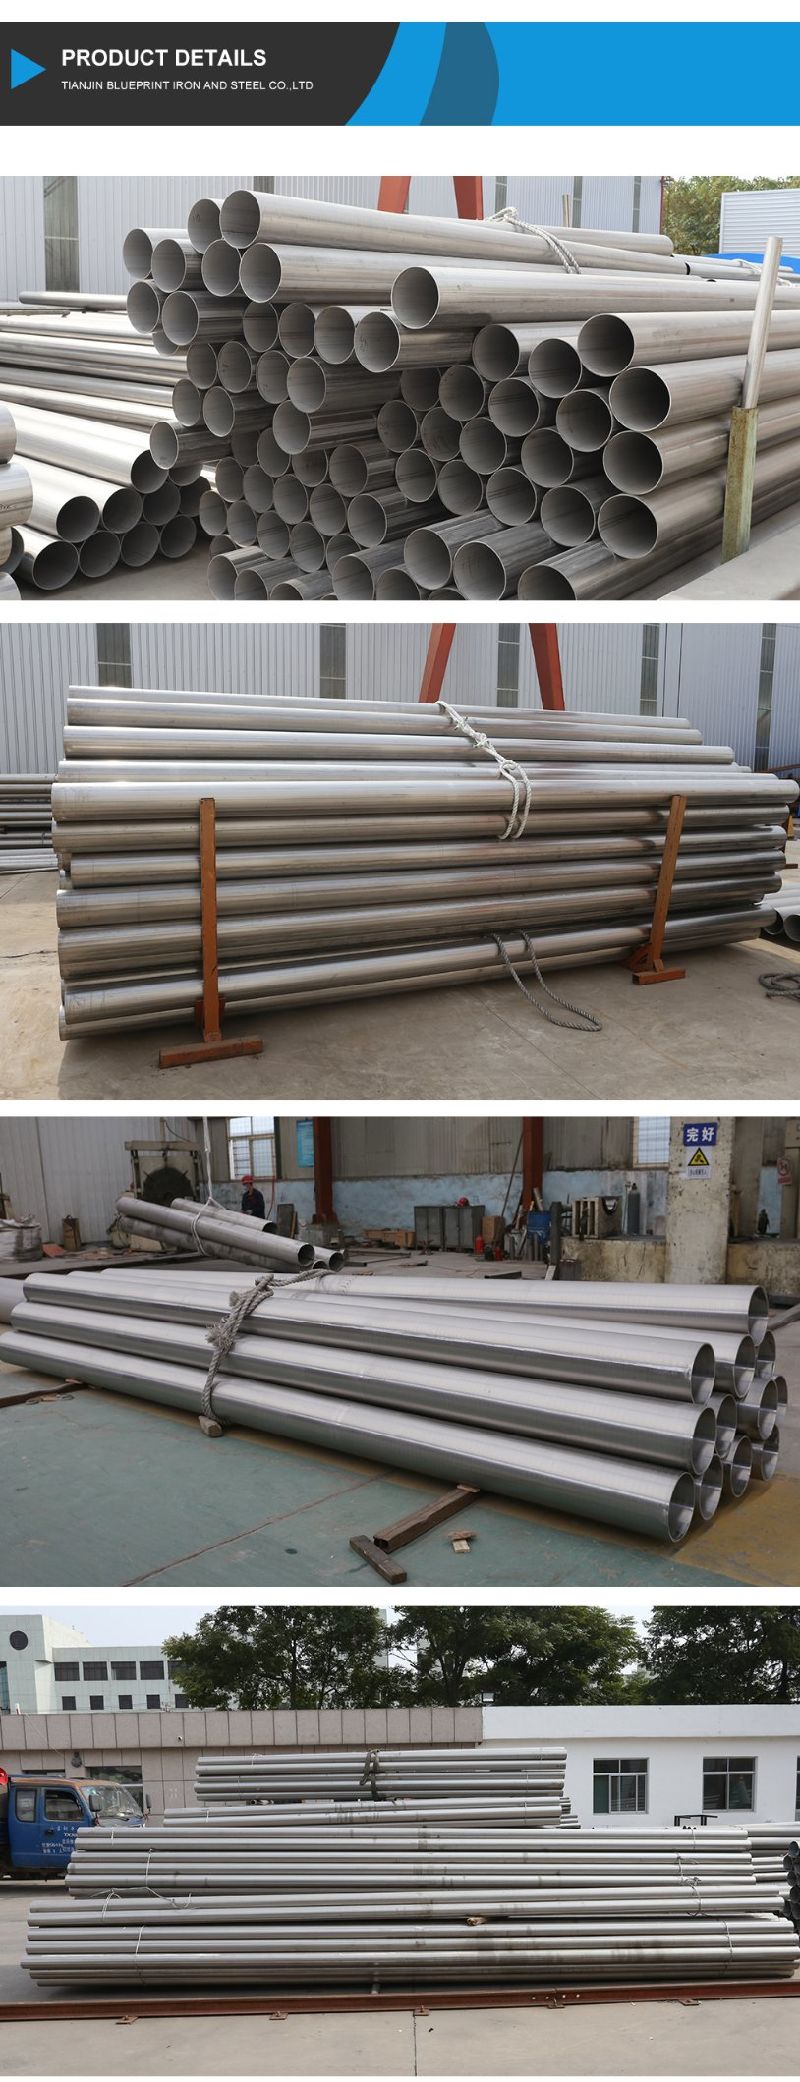 Hot Sale ERW Stainless Steel 304 Tube/Inox 304 Pipe Manufacture